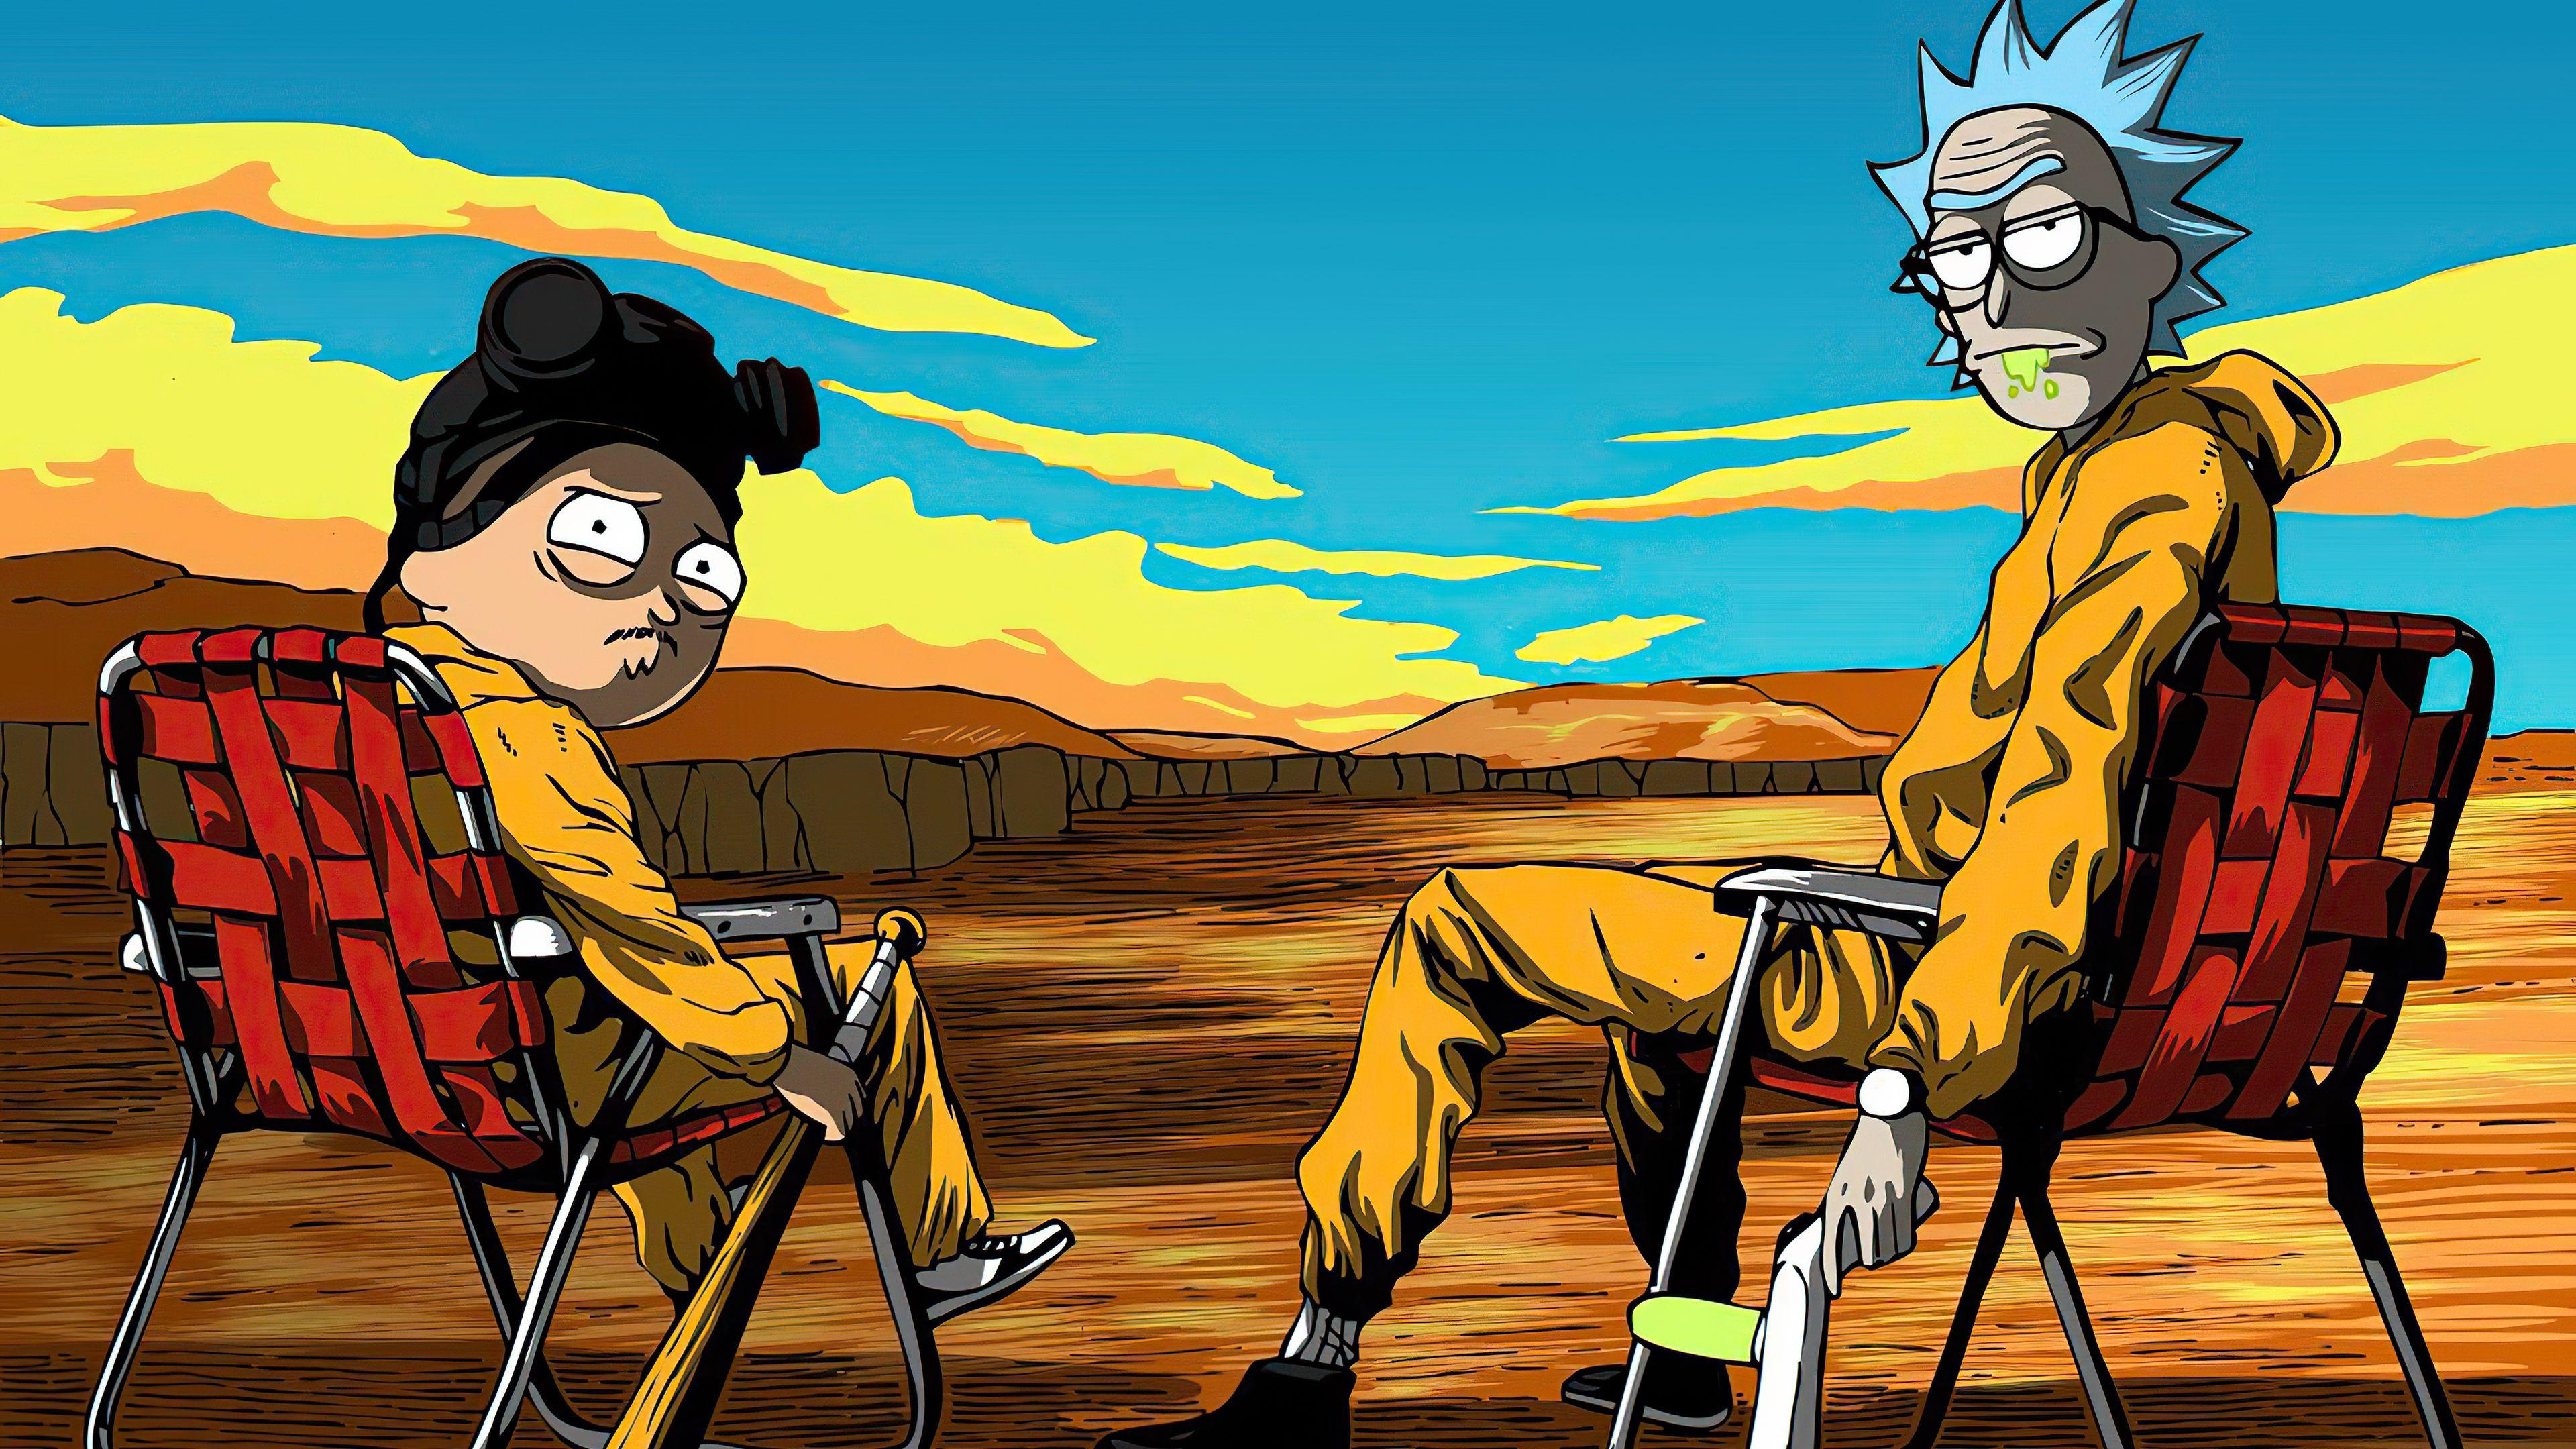 Steam WorkshopRick And Morty Best WALLPAPER